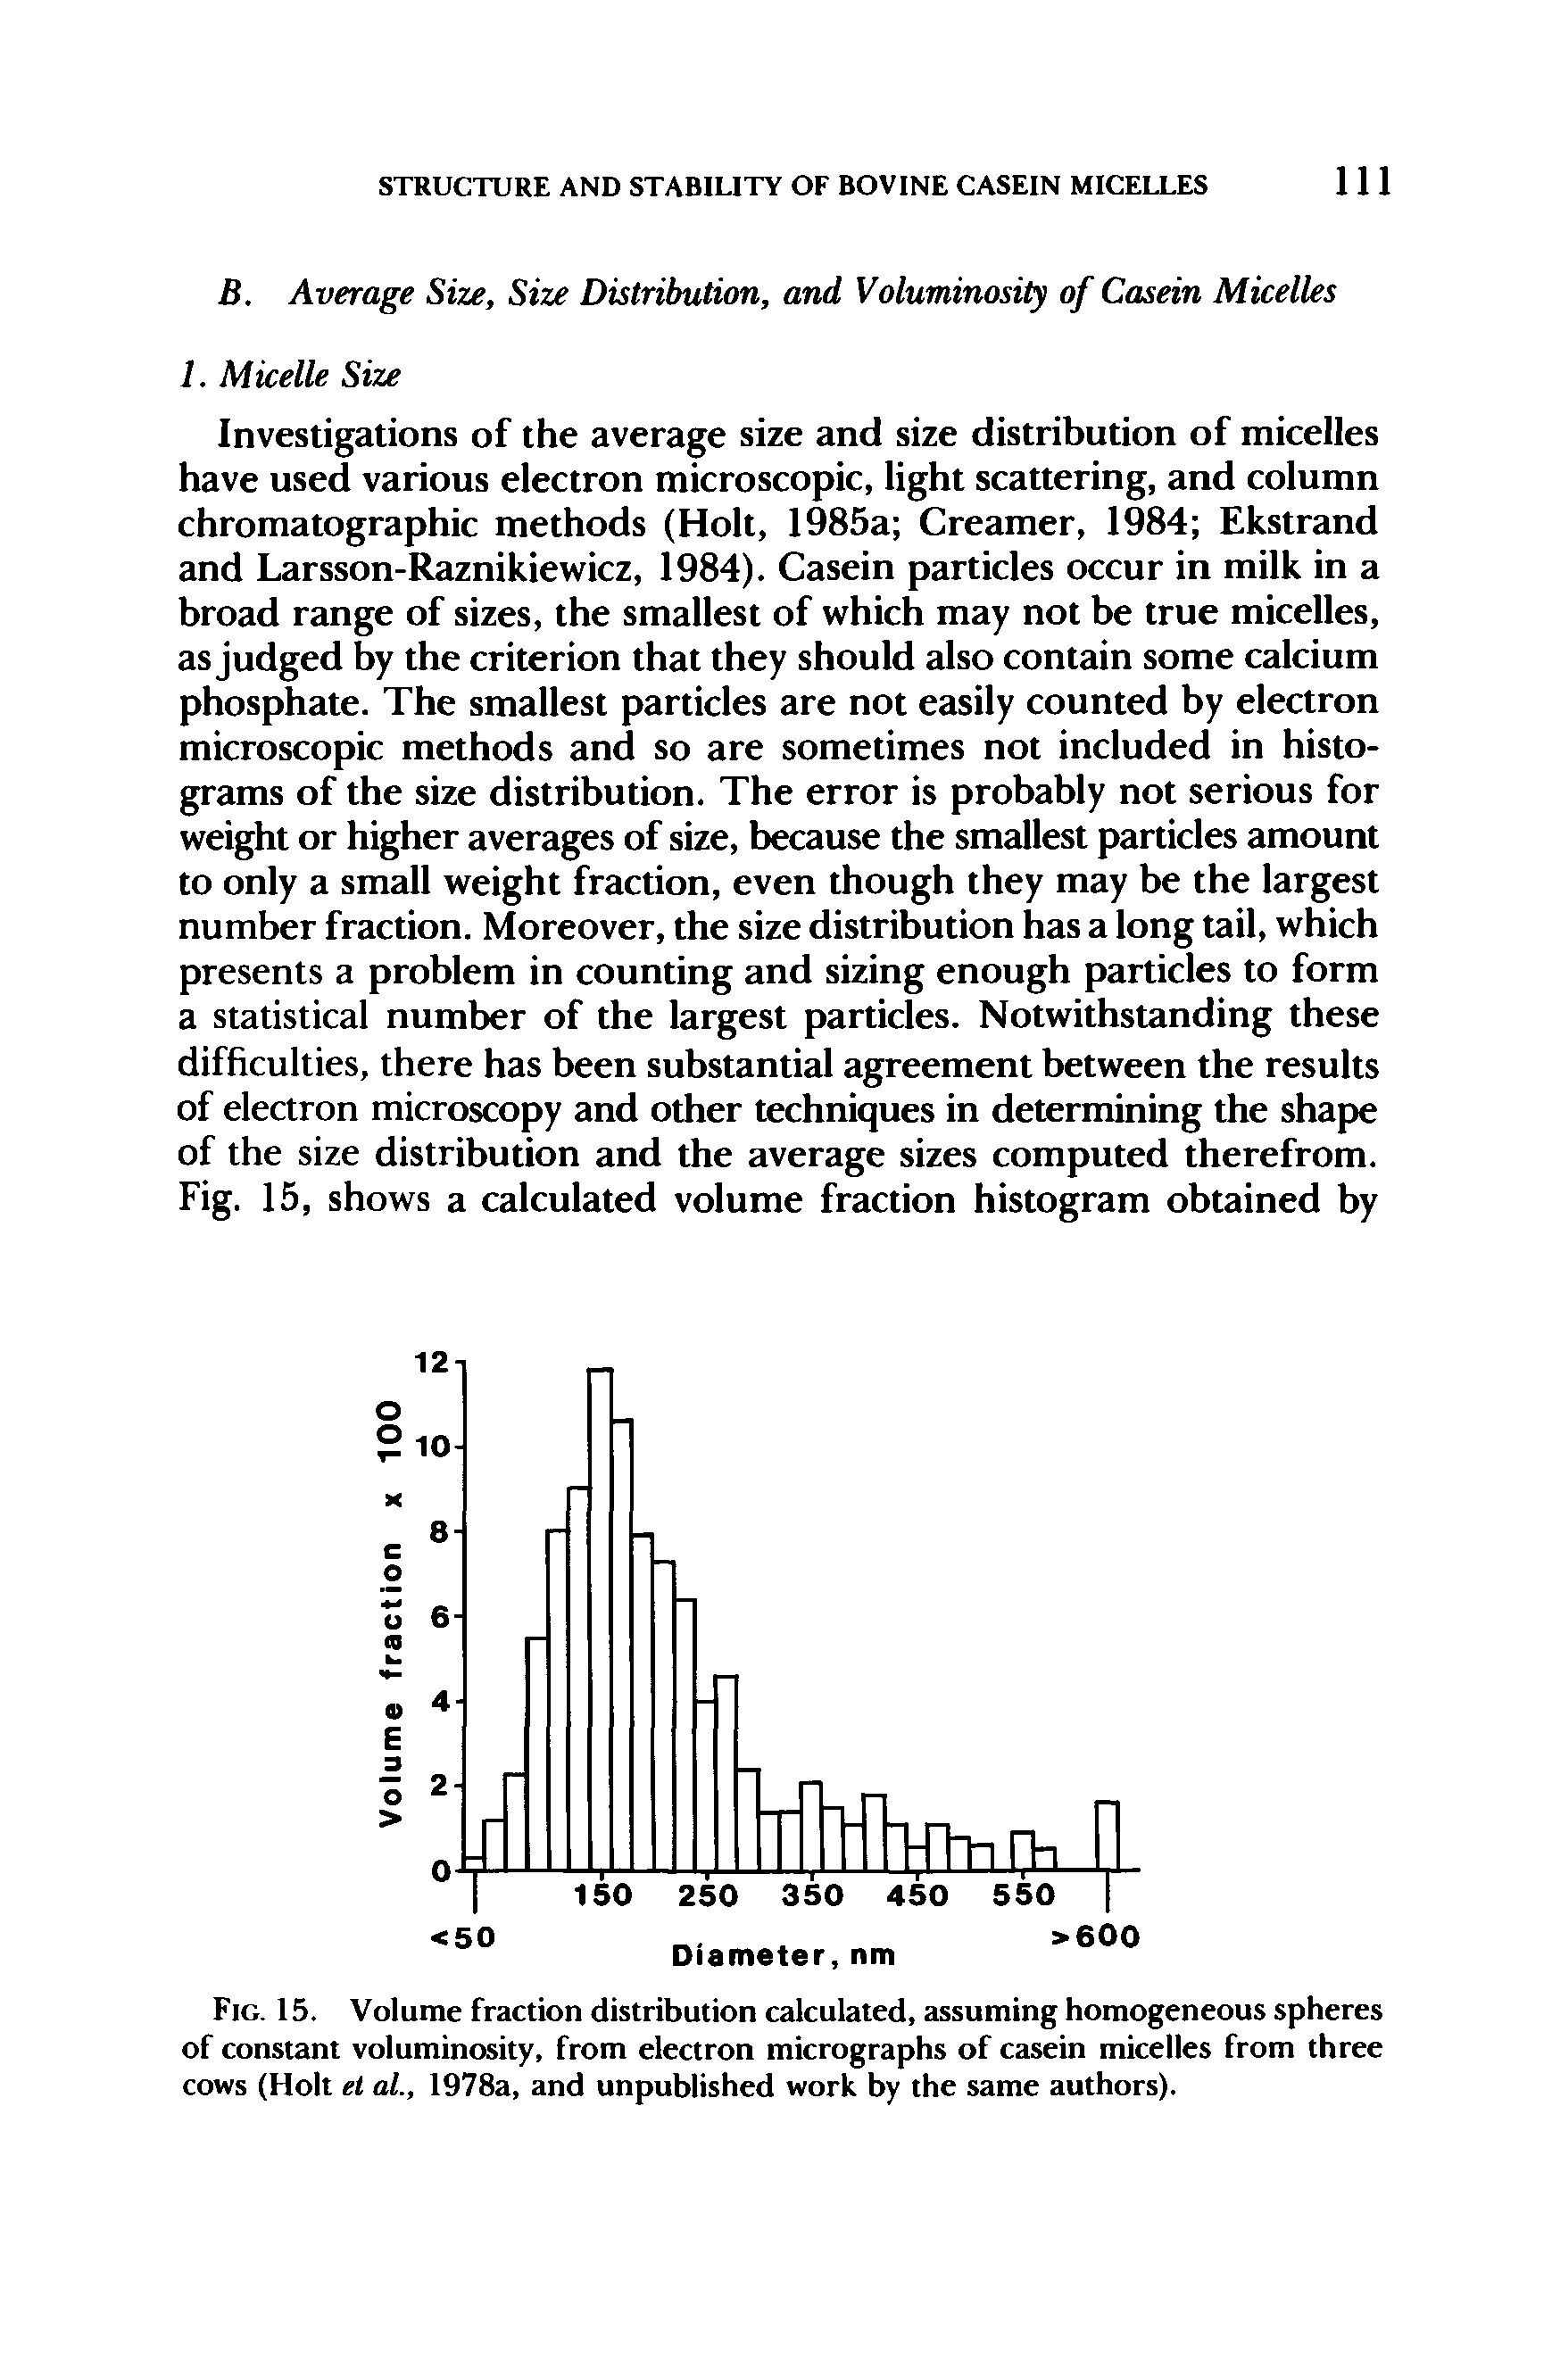 Fig. 15. Volume fraction distribution calculated, assuming homogeneous spheres of constant voluminosity, from electron micrographs of casein micelles from three cows (Holt et at., 1978a, and unpublished work by the same authors).